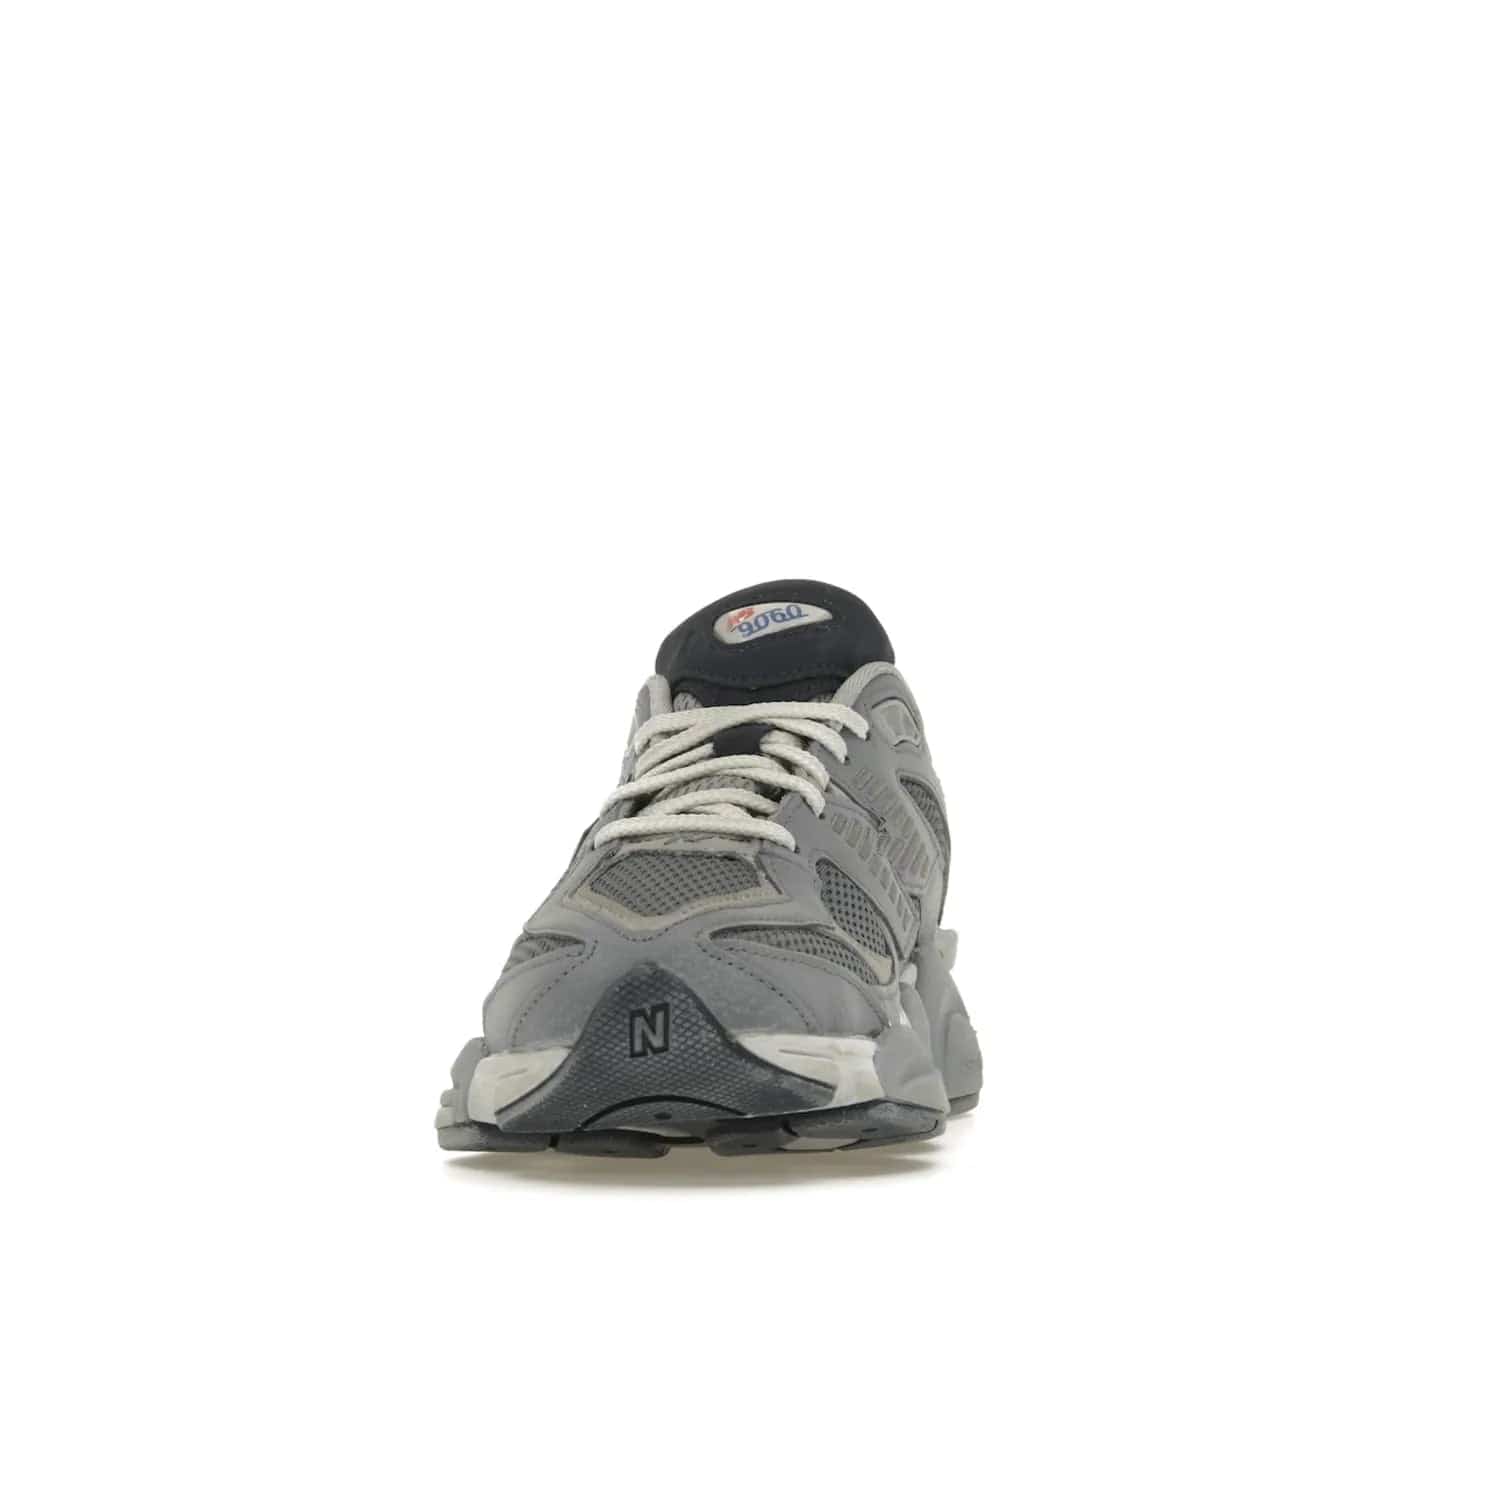 New Balance 9060 Grey Day (2023) - Image 11 - Only at www.BallersClubKickz.com - #
Sporty-meets-stylish in the New Balance 9060 Grey Day sneaker. Designed with Arctic Grey, Steel, and Silver Metallic, it offers an edgy but wearable look along with classic NB comfort and quality.